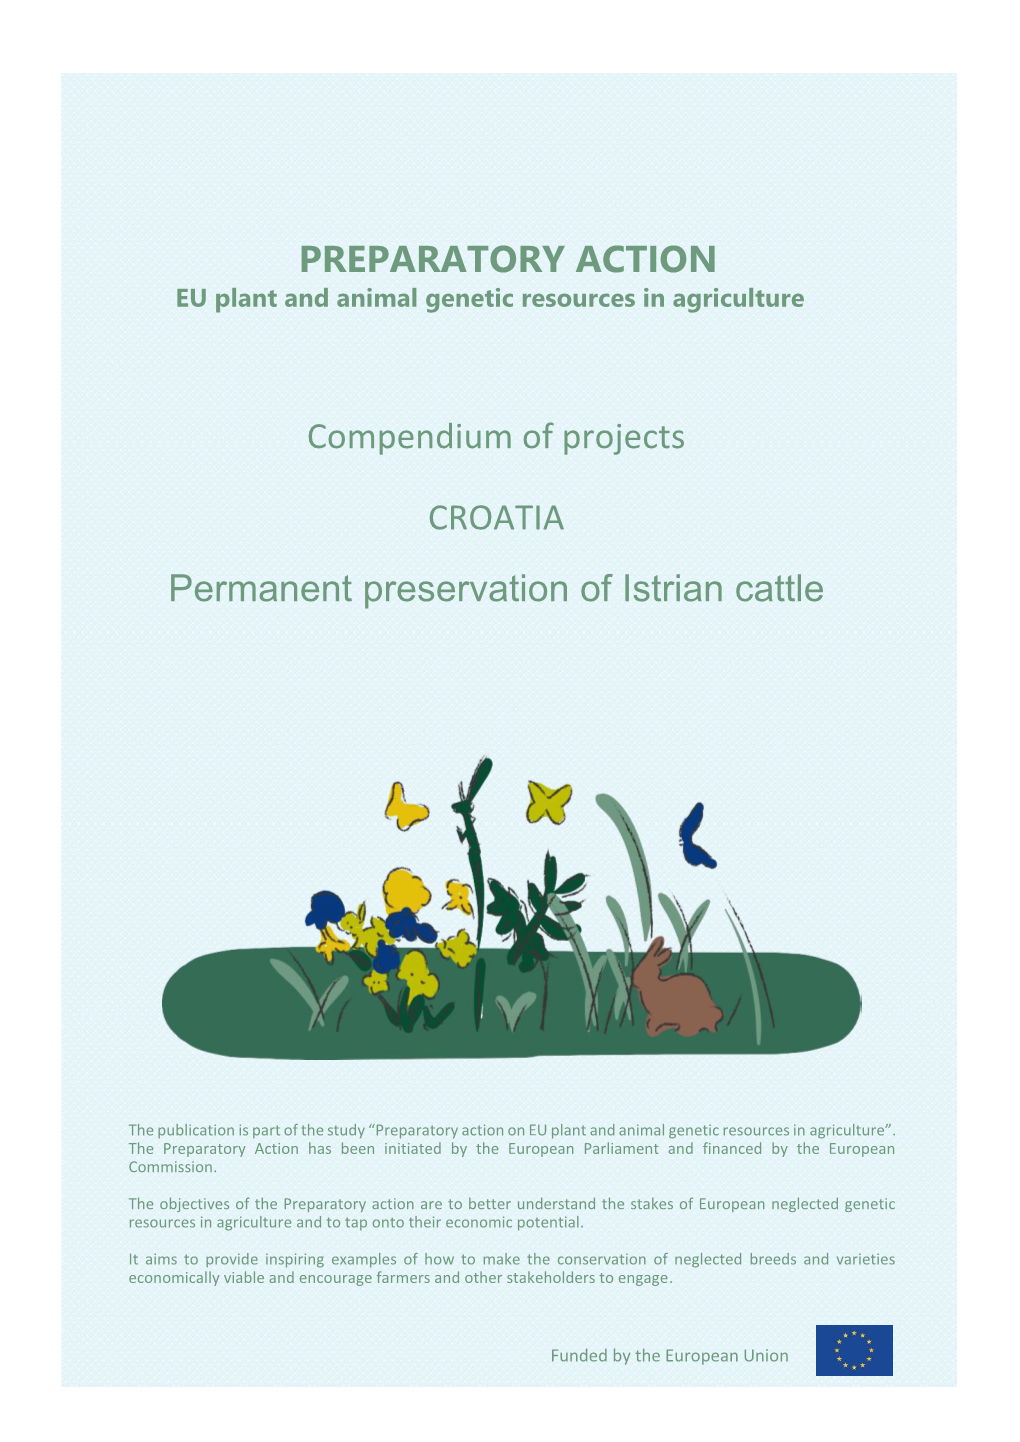 Istrian Cattle Project Was Particularly Effective in Meeting the Interest of the Wider Community and in Ensuring Growth in the Number of Heads